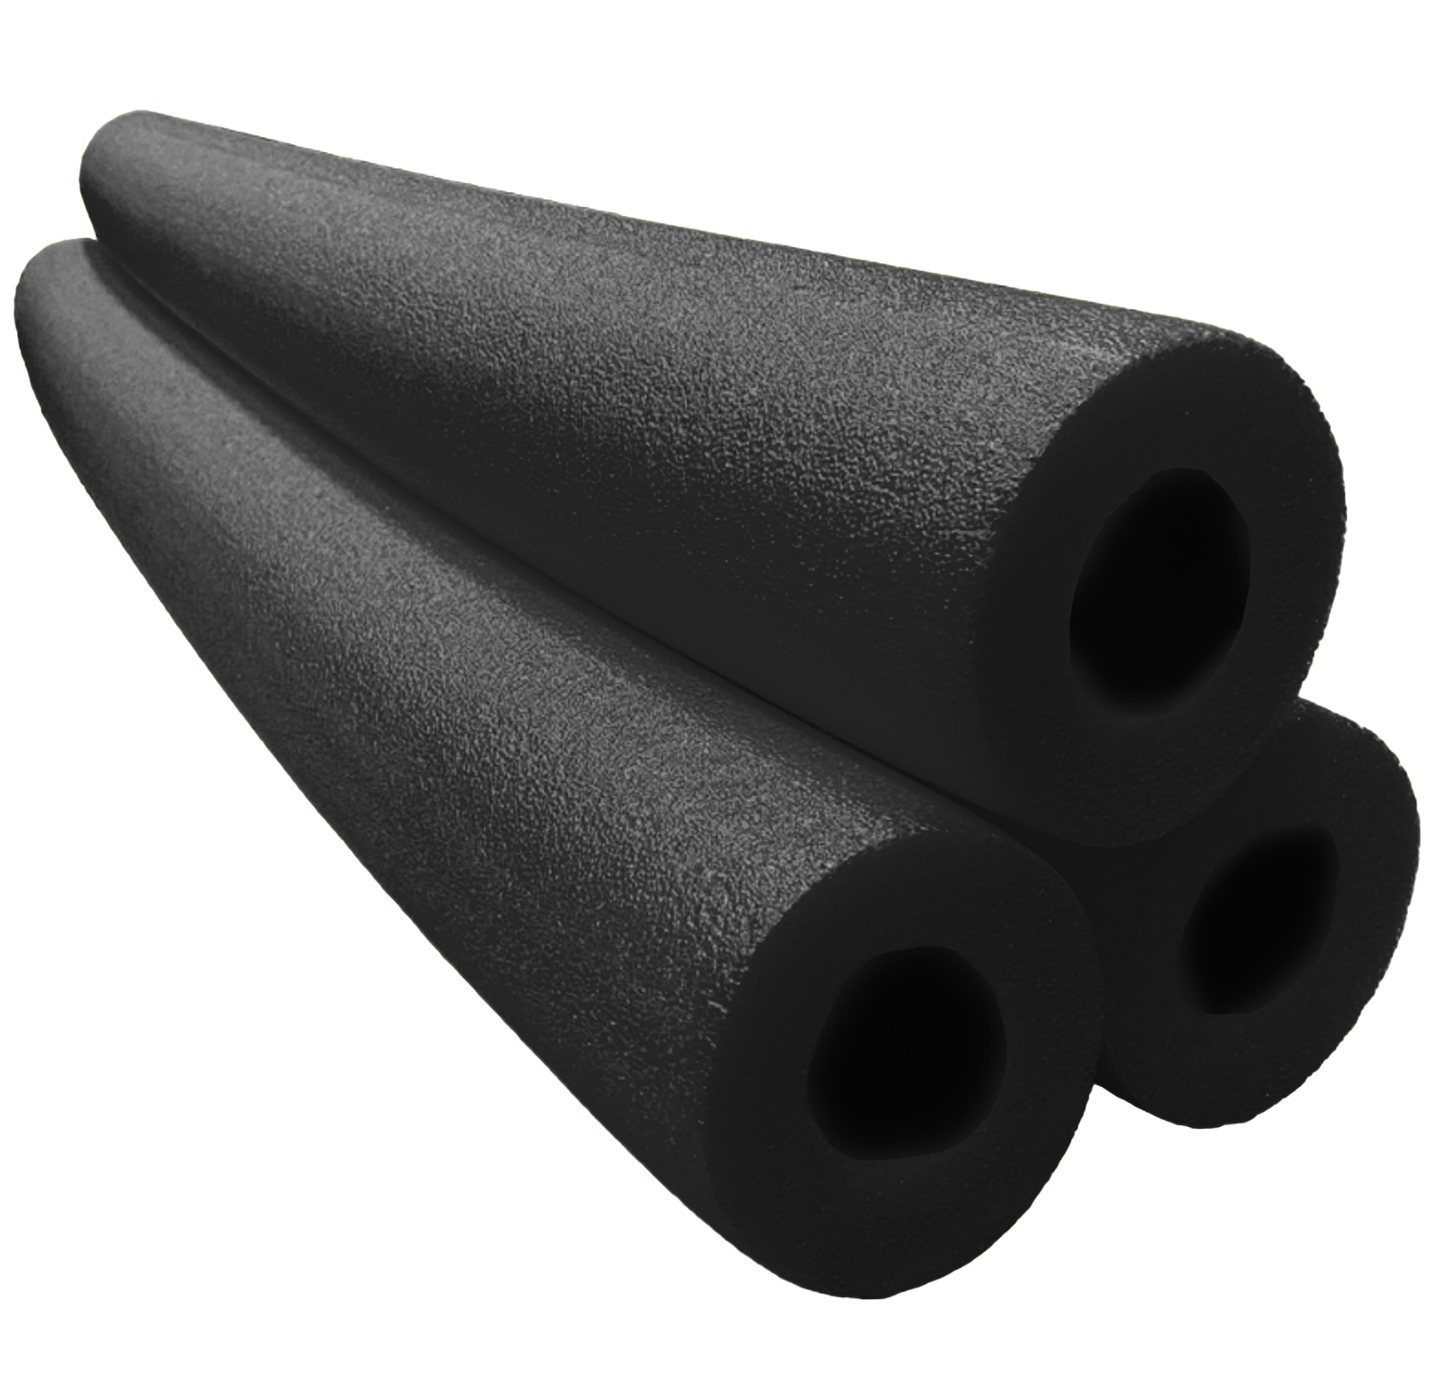 OodleMaxx Giant Pool Noodle Black- 1, 3, 12 Count Packs